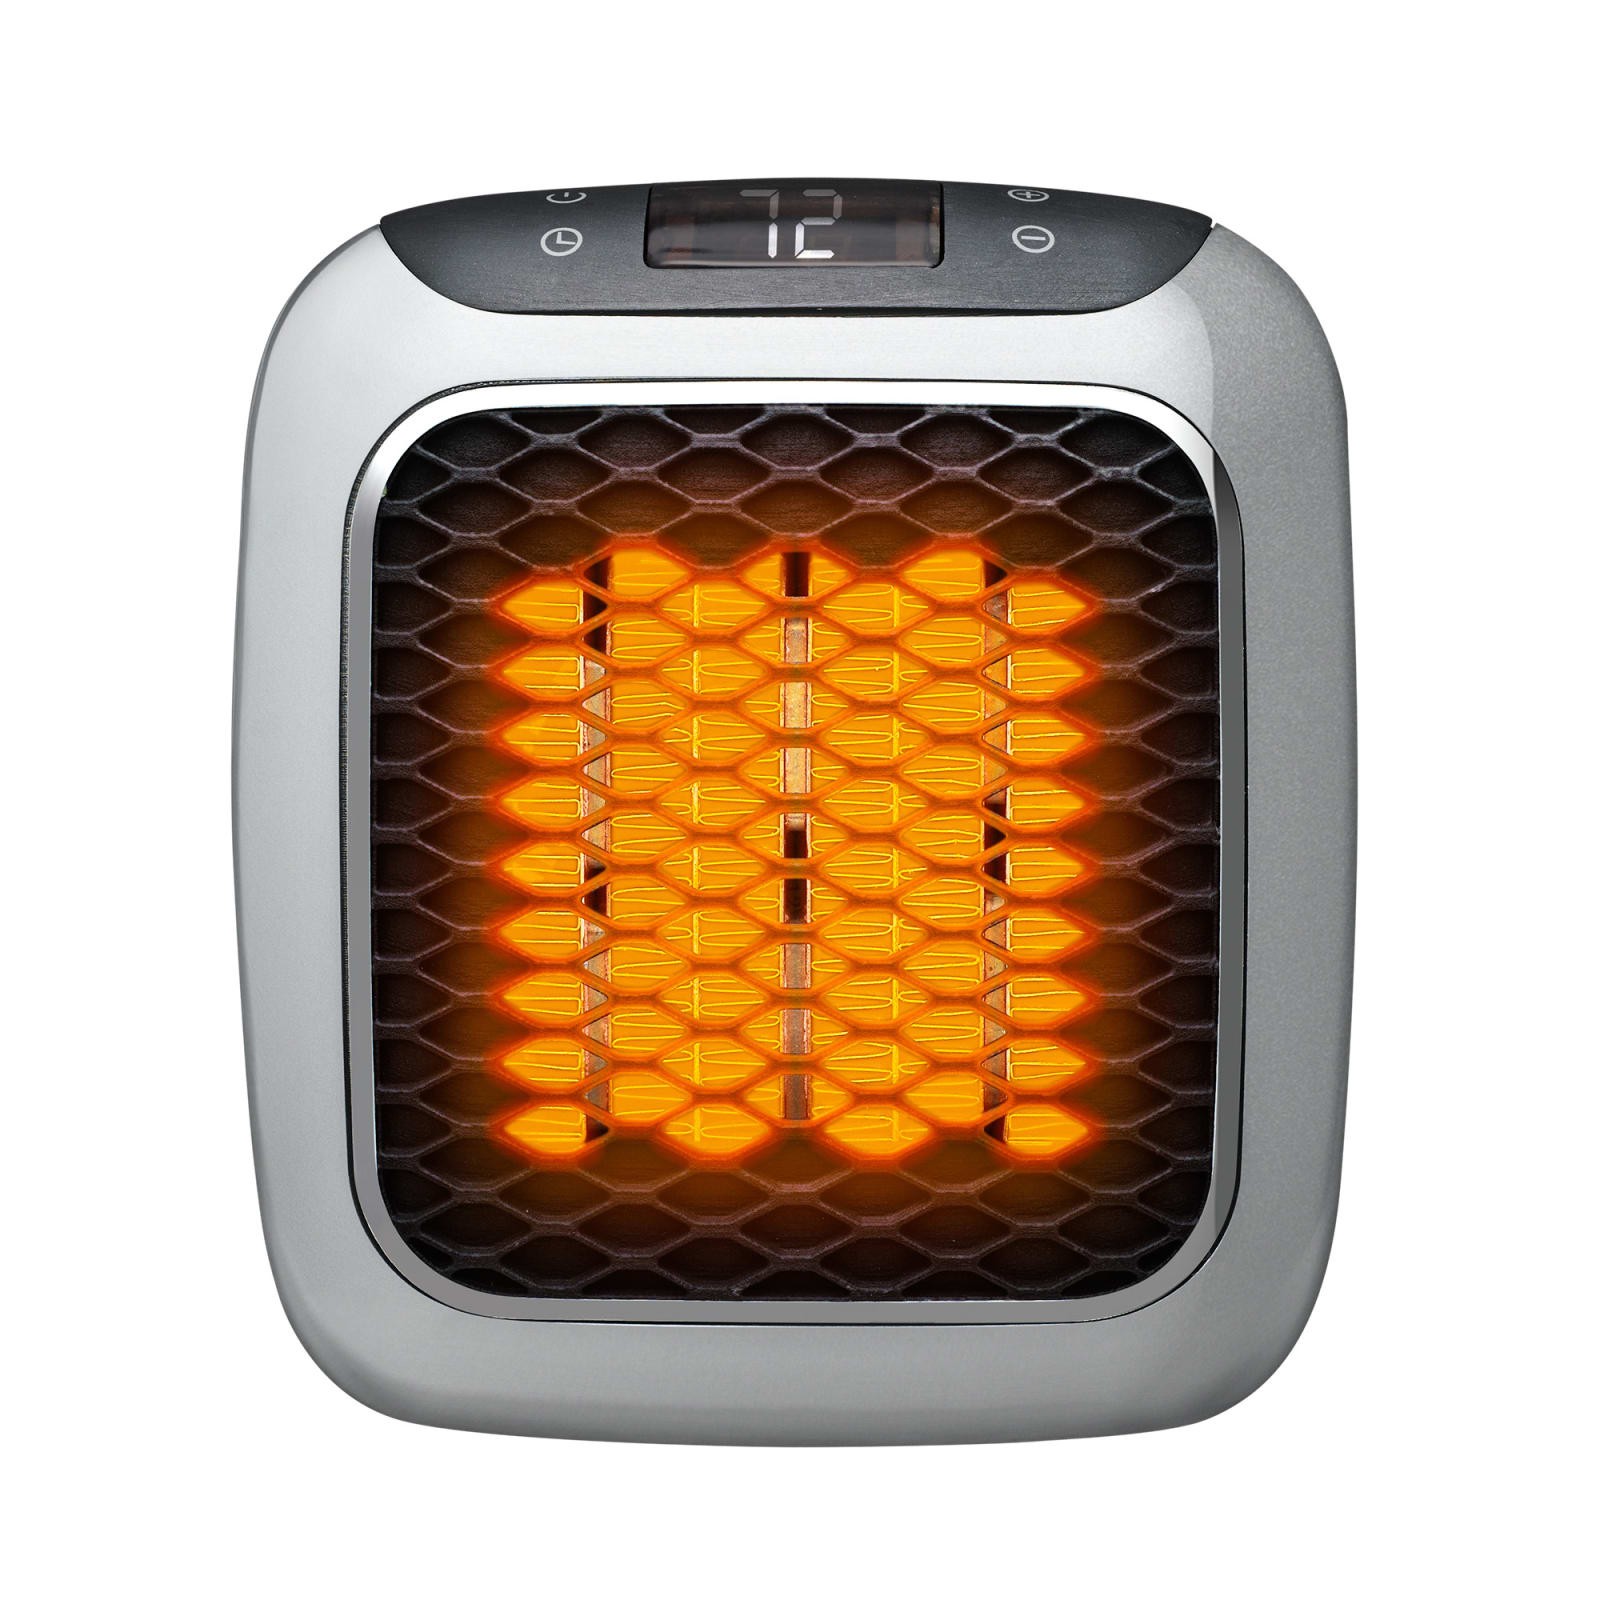 Turbo 800 Wall-Outlet Space Heater by Handy Heater at Fleet Farm